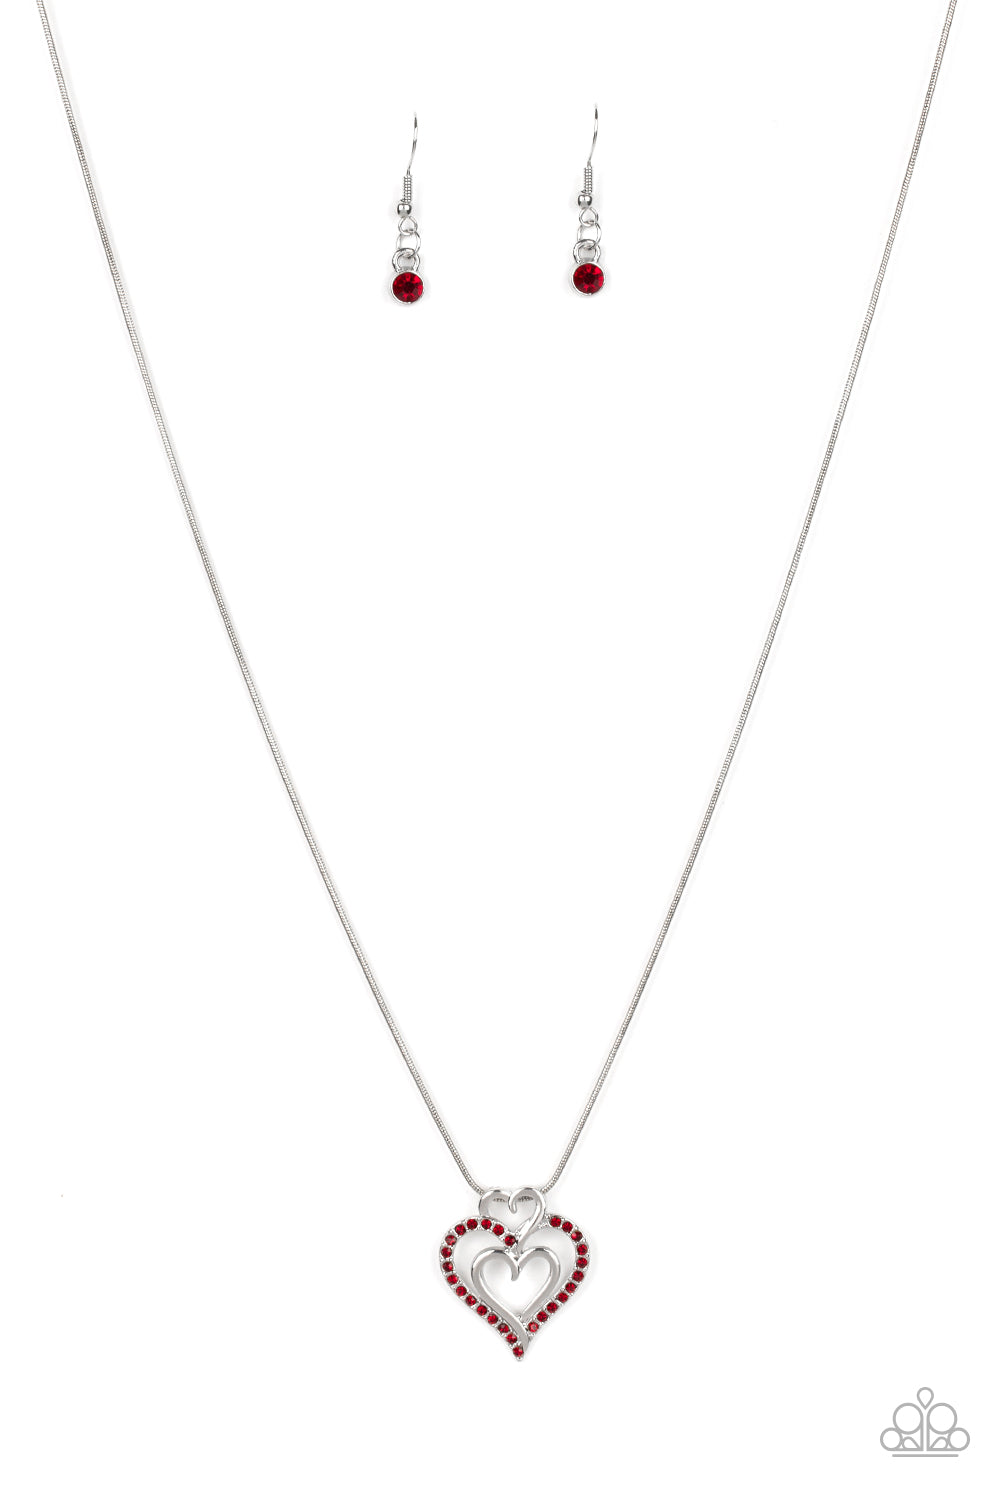 Triple The Beat Red Paparazzi Necklace Cashmere Pink Jewels - Cashmere Pink Jewels & Accessories, Cashmere Pink Jewels & Accessories - Paparazzi